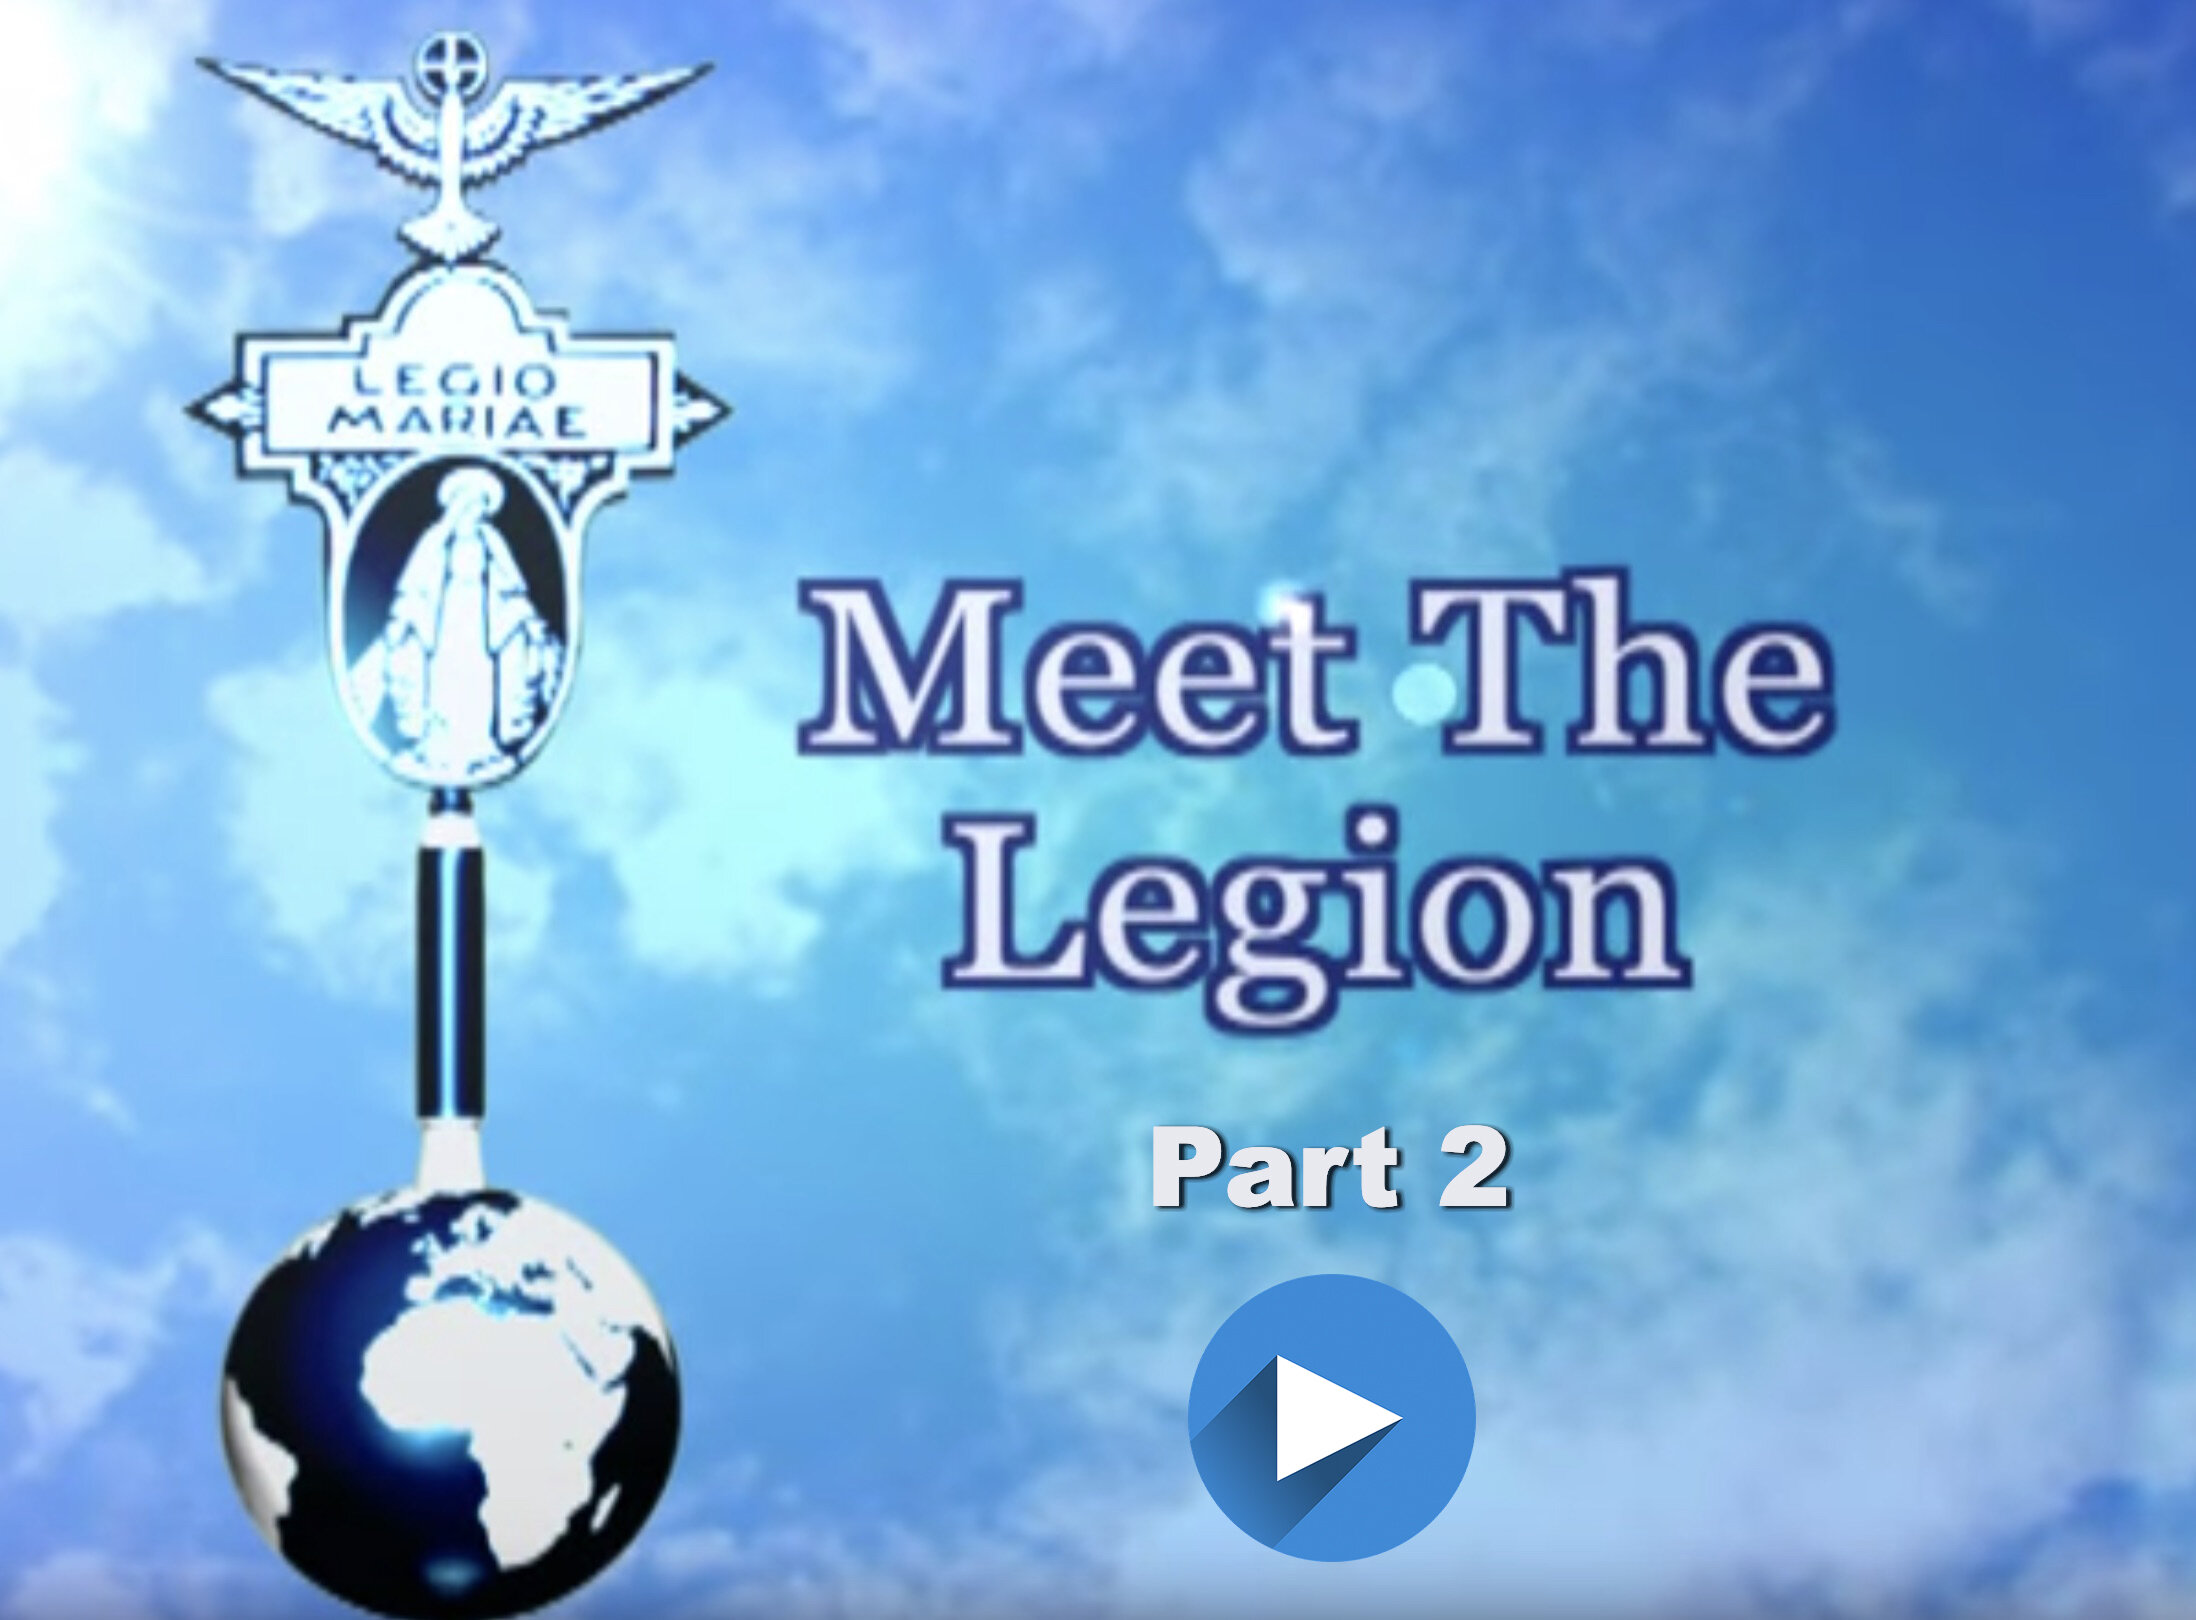 LEGION OF MARY VIDEO COVER with arrow PART 2.jpg